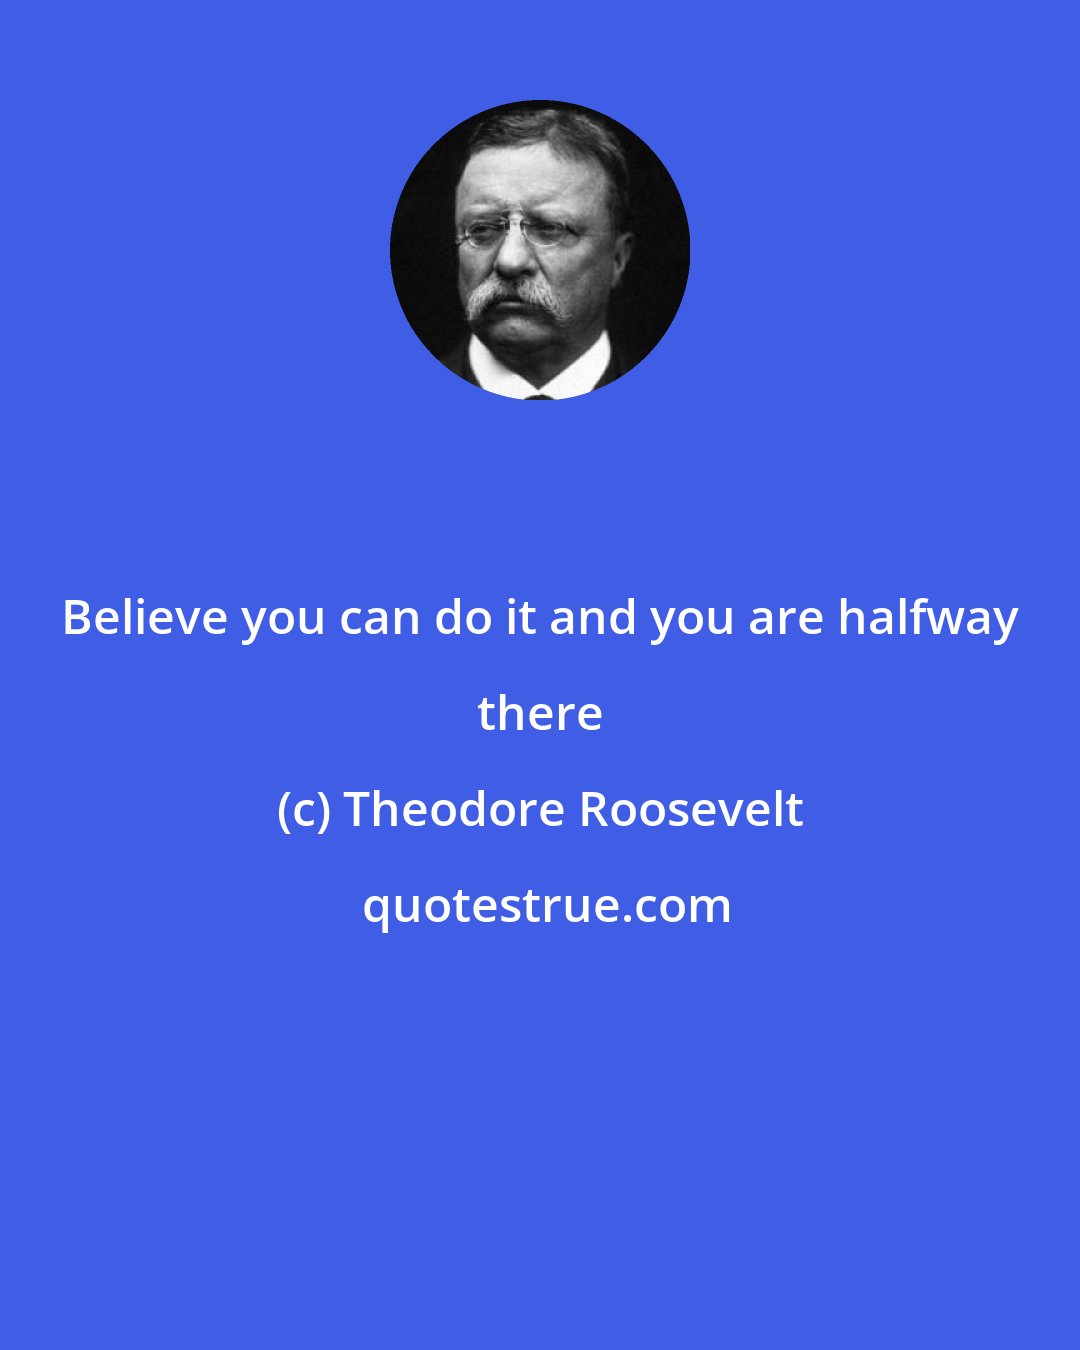 Theodore Roosevelt: Believe you can do it and you are halfway there